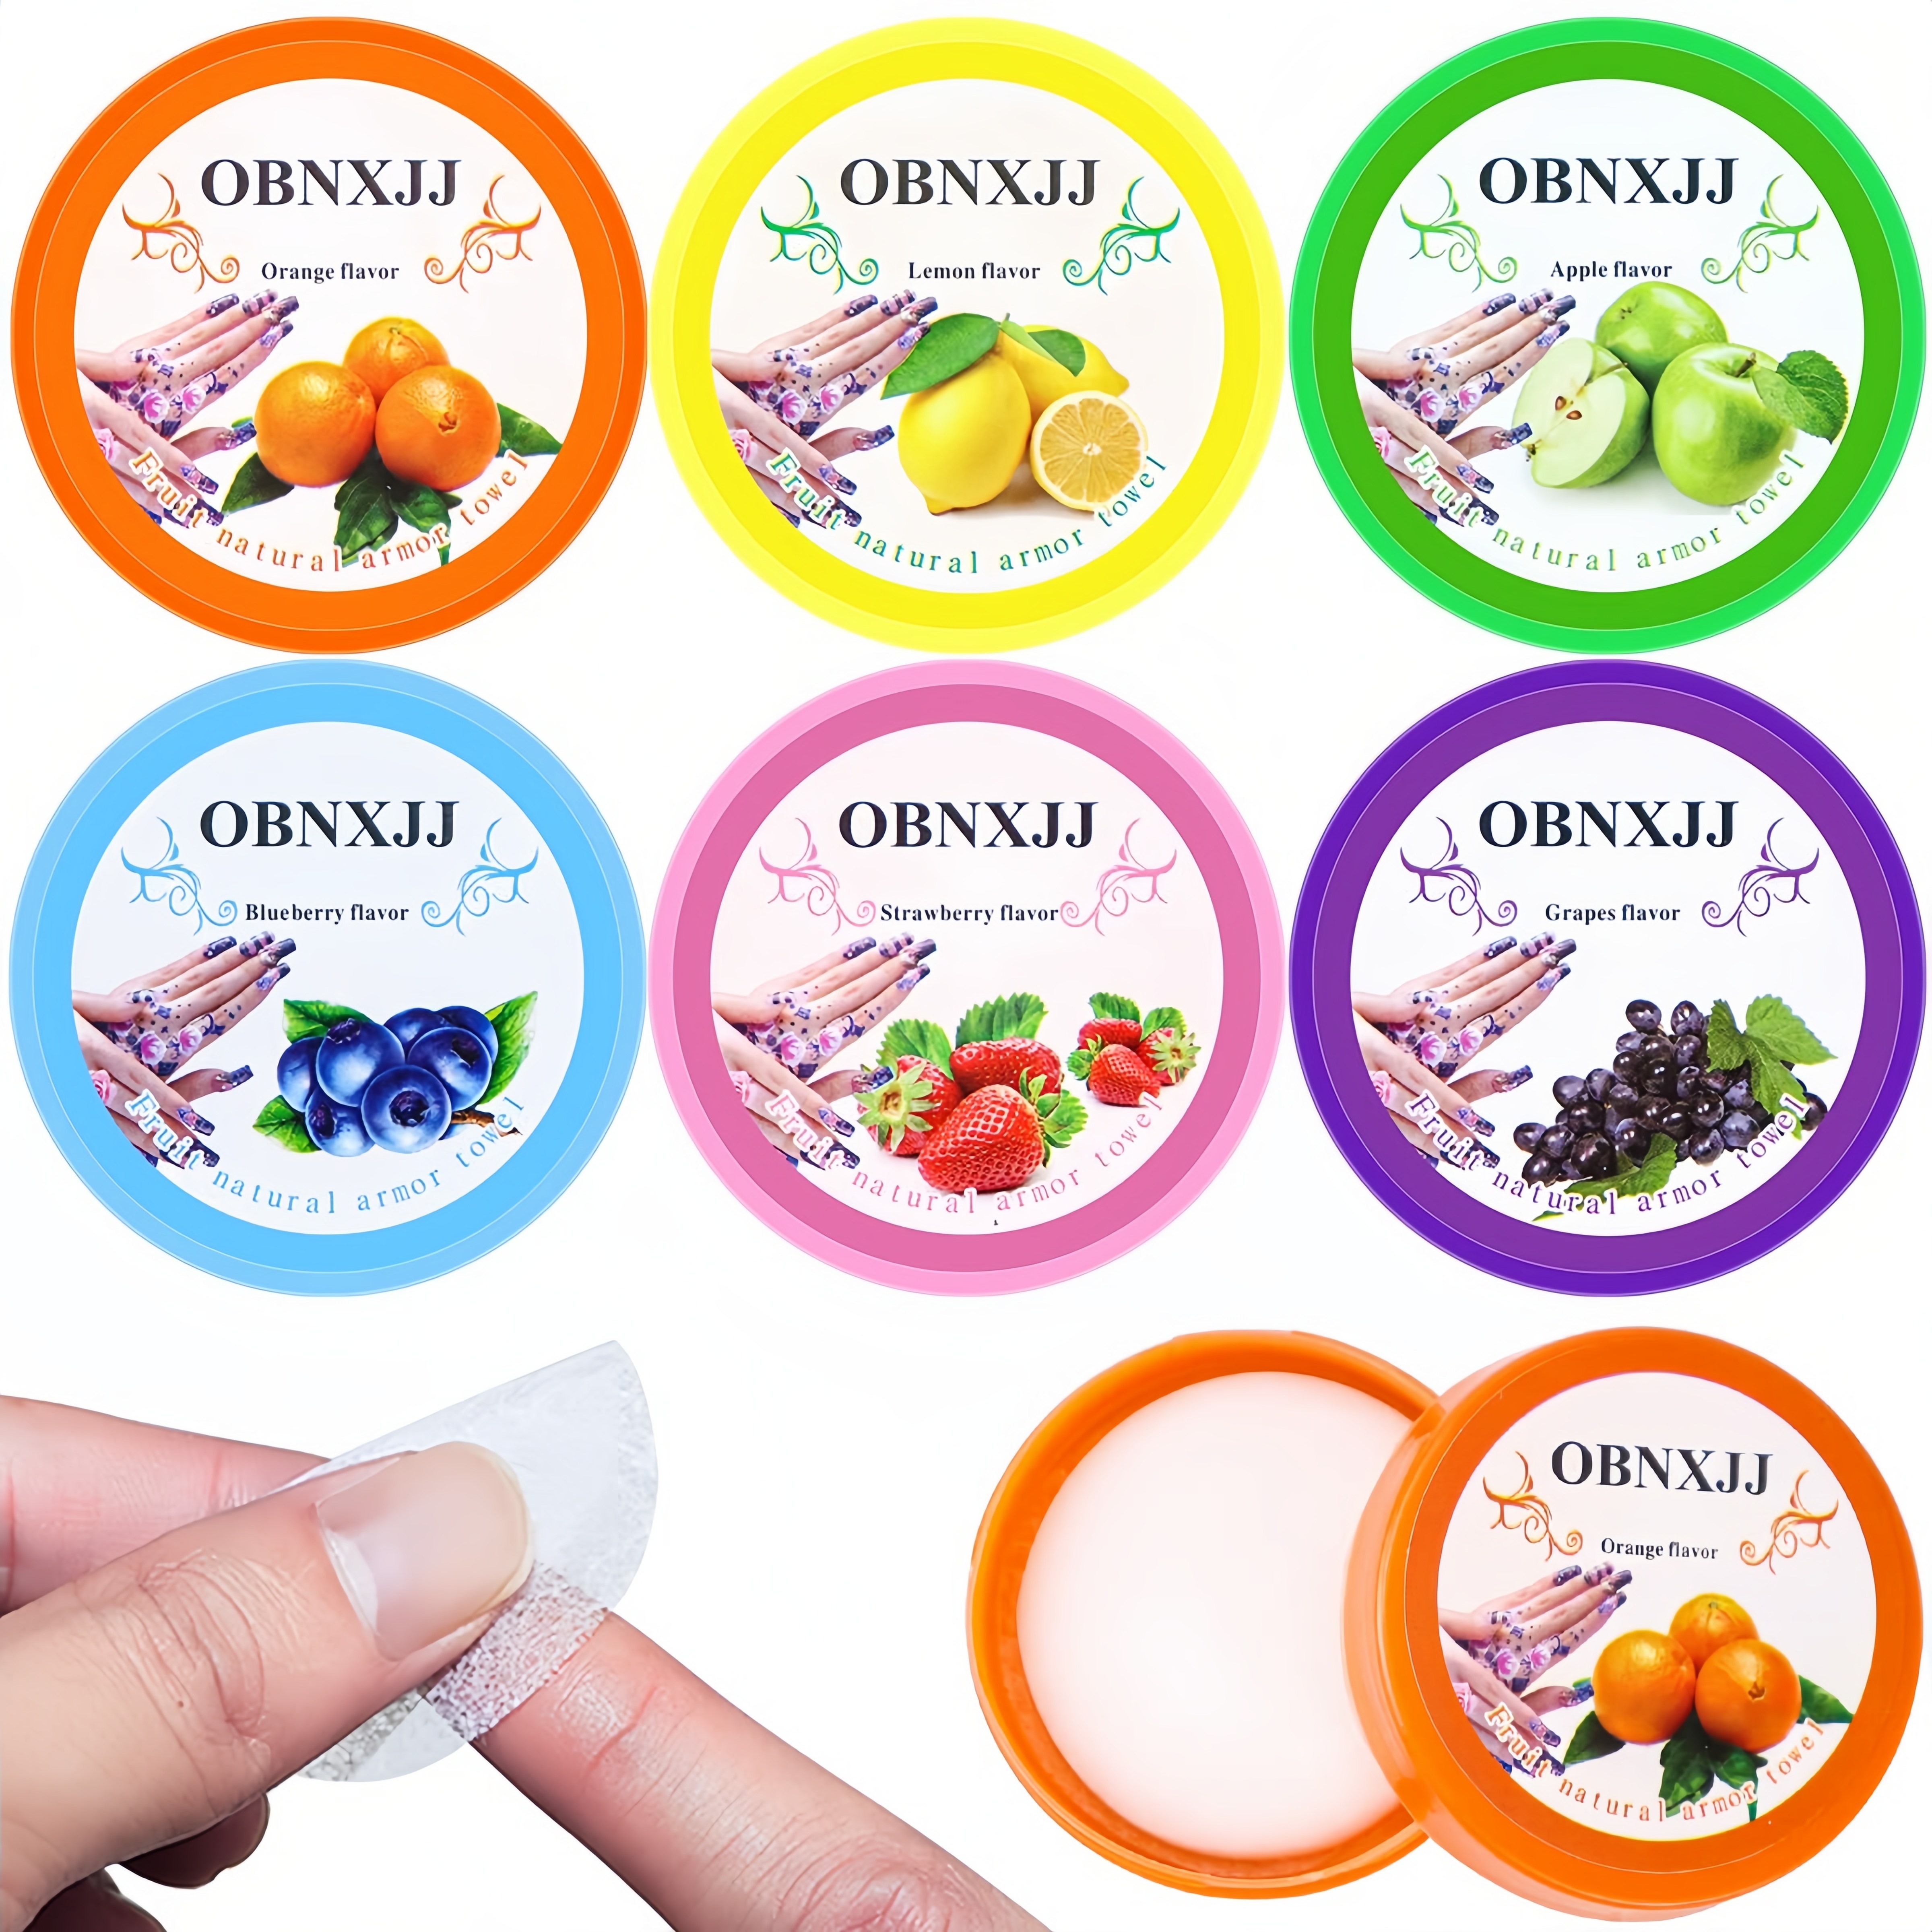 OBN Nail Polish Remover Tissue Pads Wet Wipes Pack of 6 - Price in India,  Buy OBN Nail Polish Remover Tissue Pads Wet Wipes Pack of 6 Online In  India, Reviews, Ratings